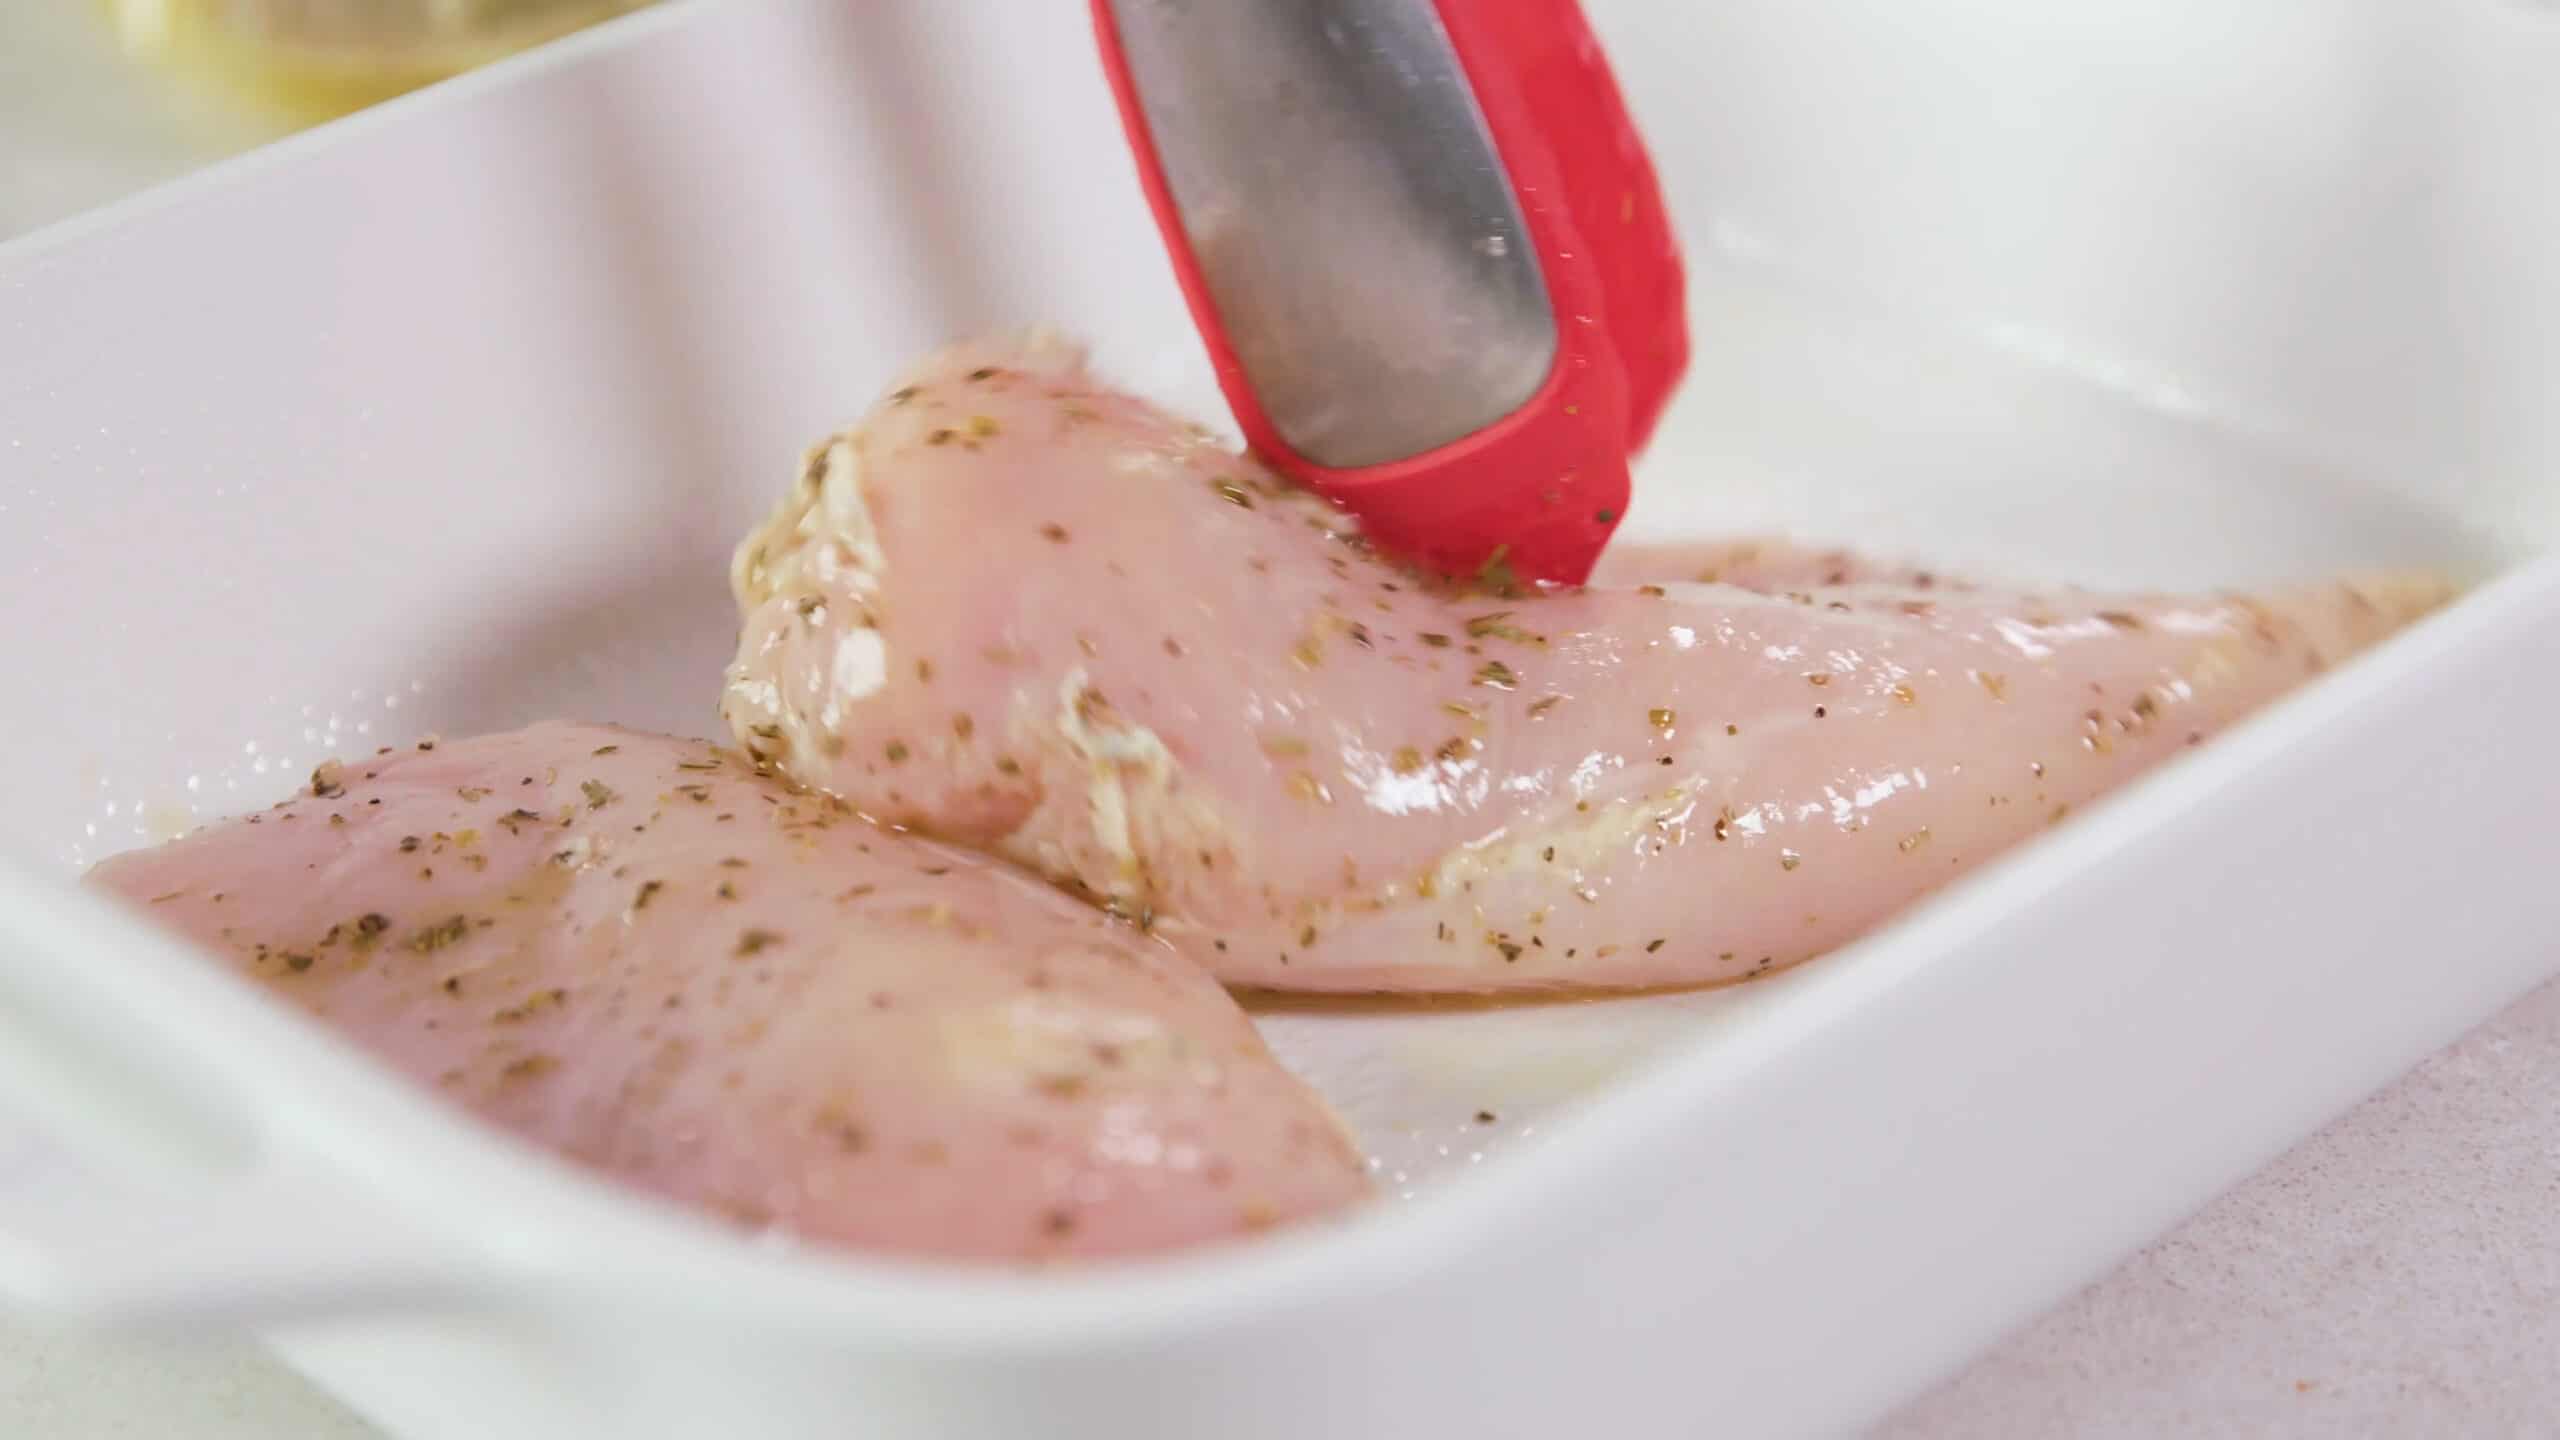 Angled view of white glass casserole dish being filled with lemon herb coated chicken breasts placed in using red plastic tongs all on a clean marble countertop.